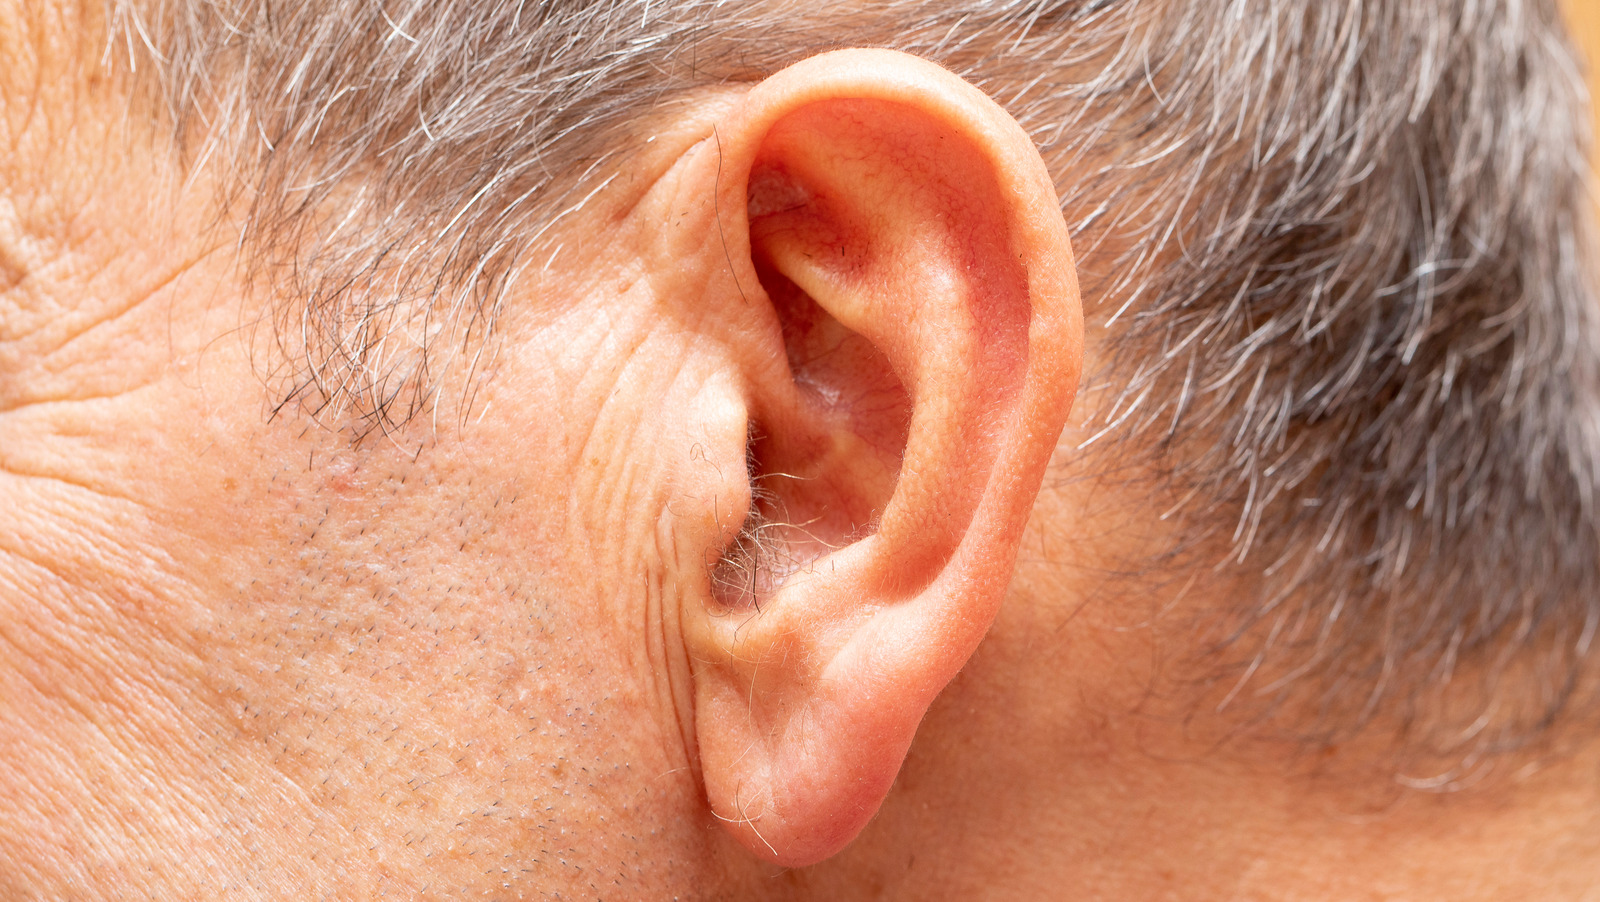 Lets Talk About The Hairs In The Ear  Ear Hairs  Steemit